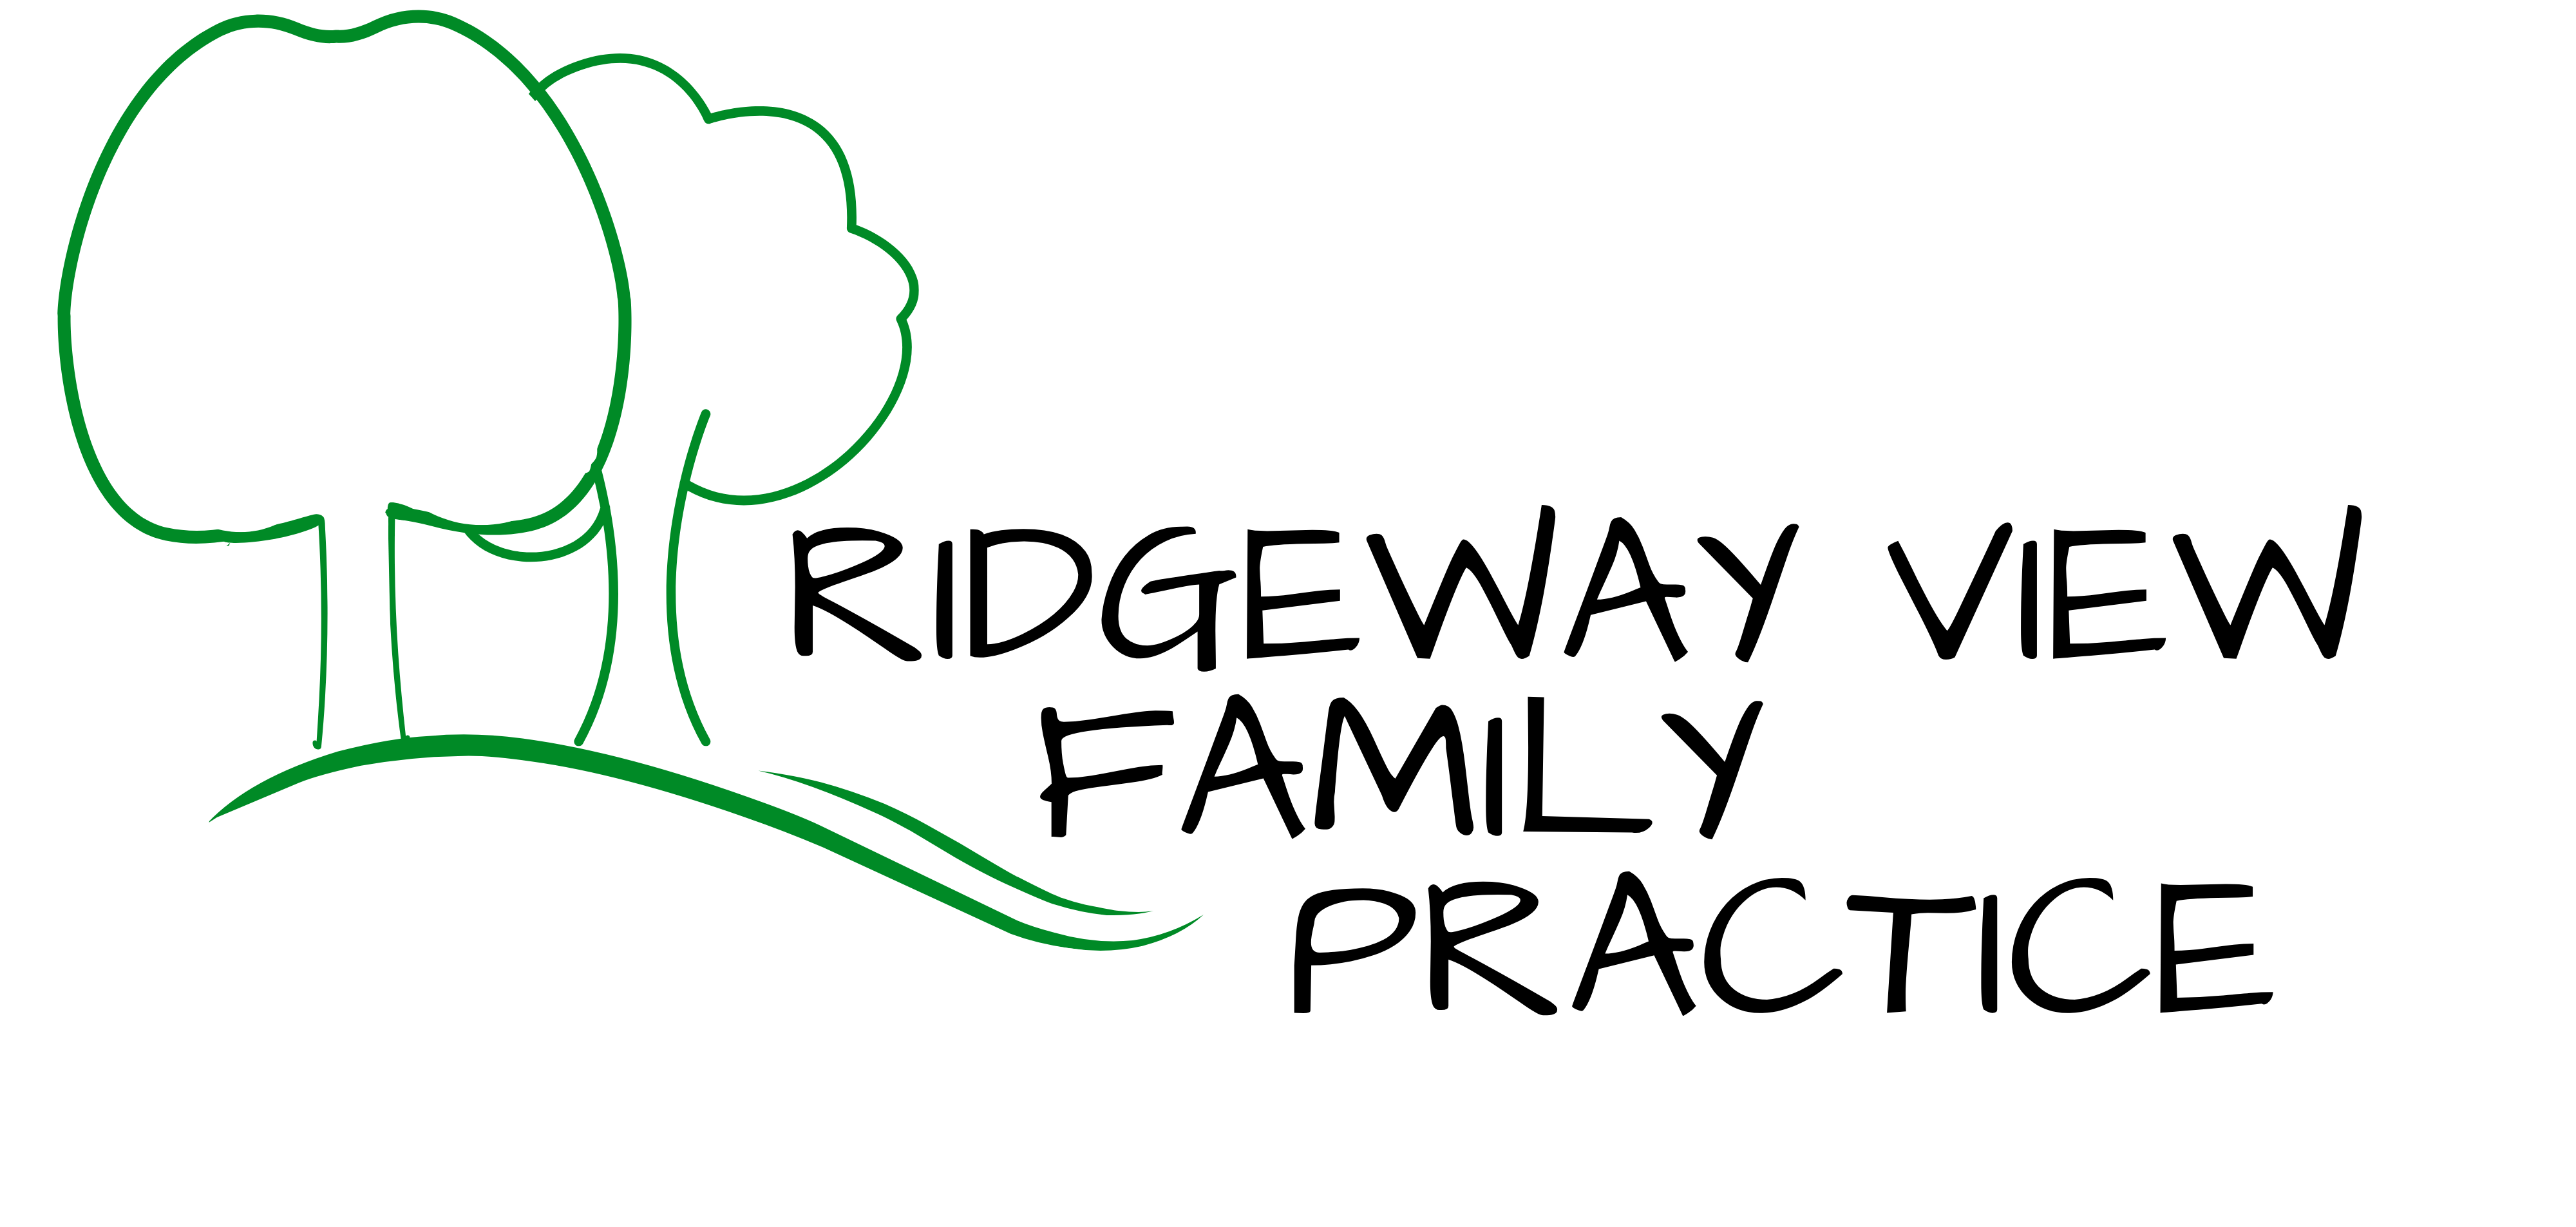 Ridgeway View Family Practice logo and homepage link